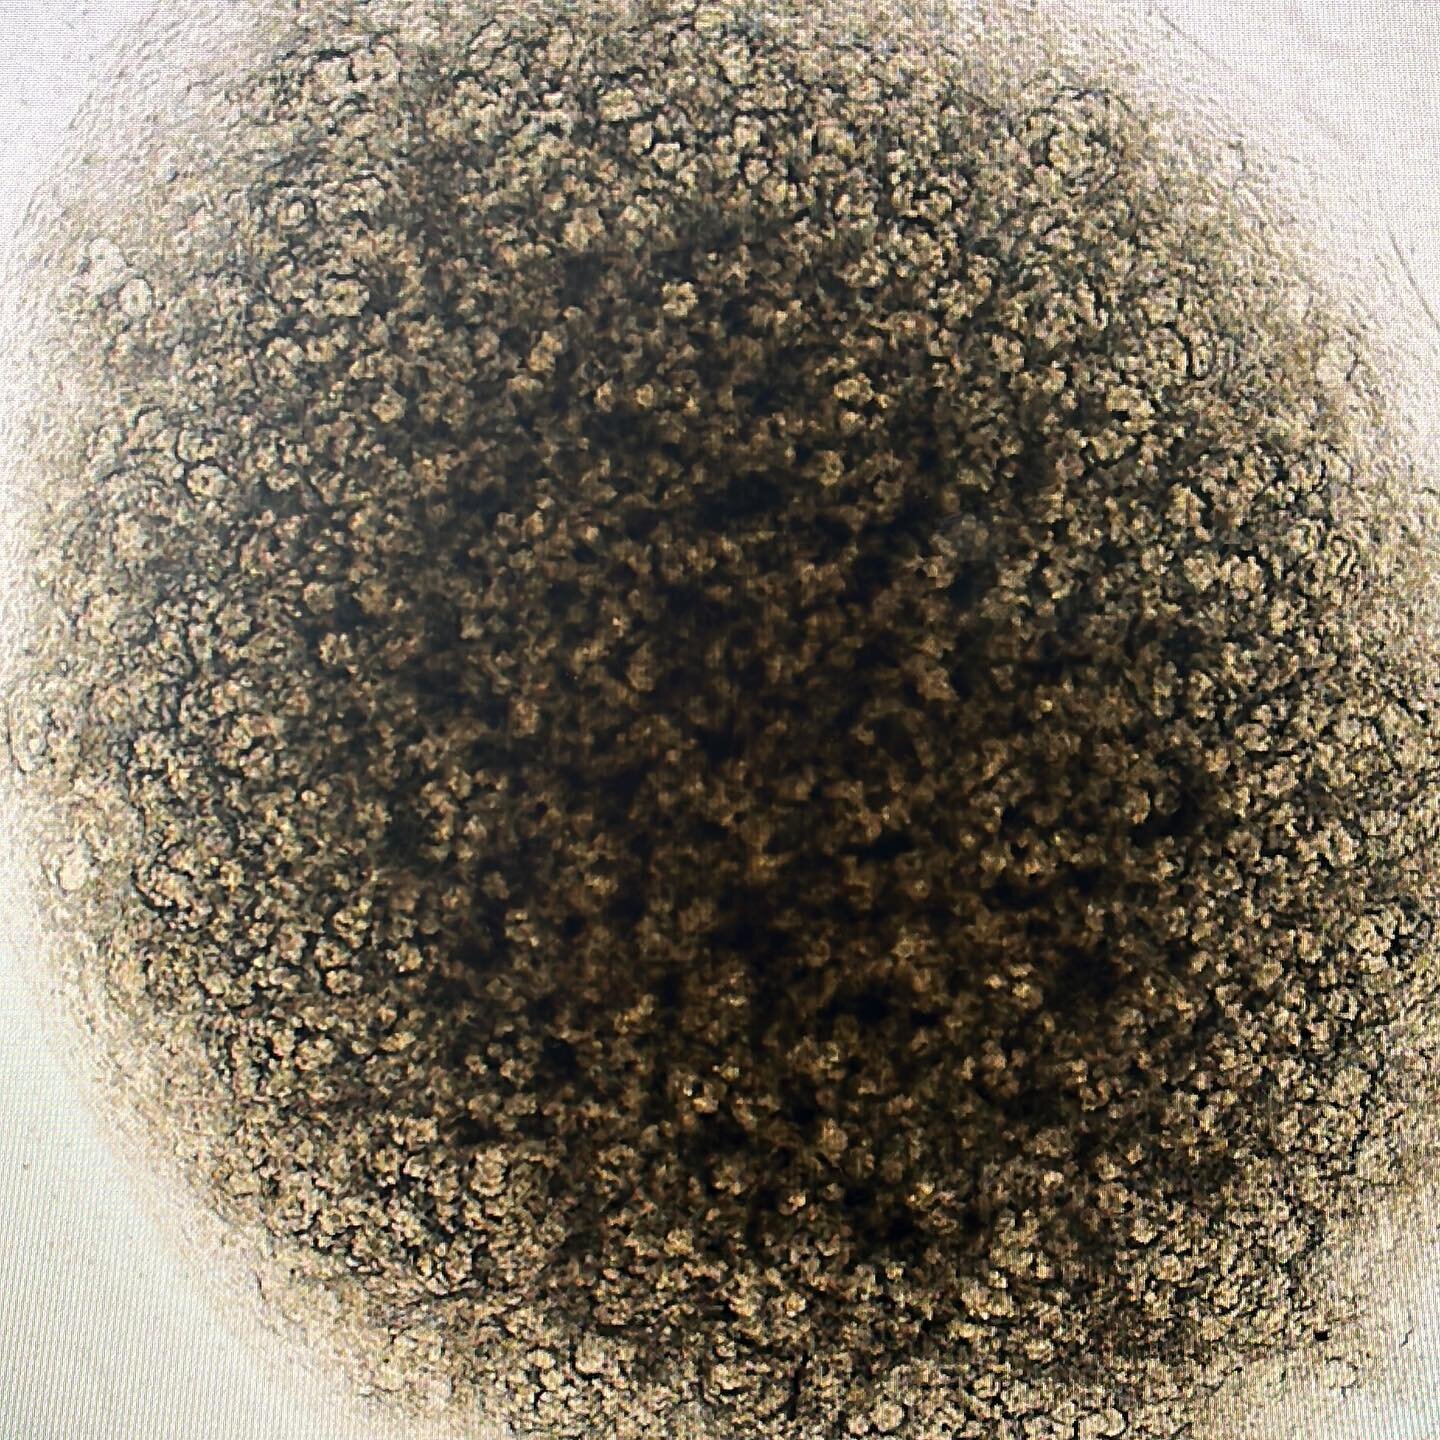 We are very excited to be growing our first kidney organoids! They look so beautiful! Always exciting to introduce new techniques to our lab arsenal. 
#organoids #kidneyorganoids